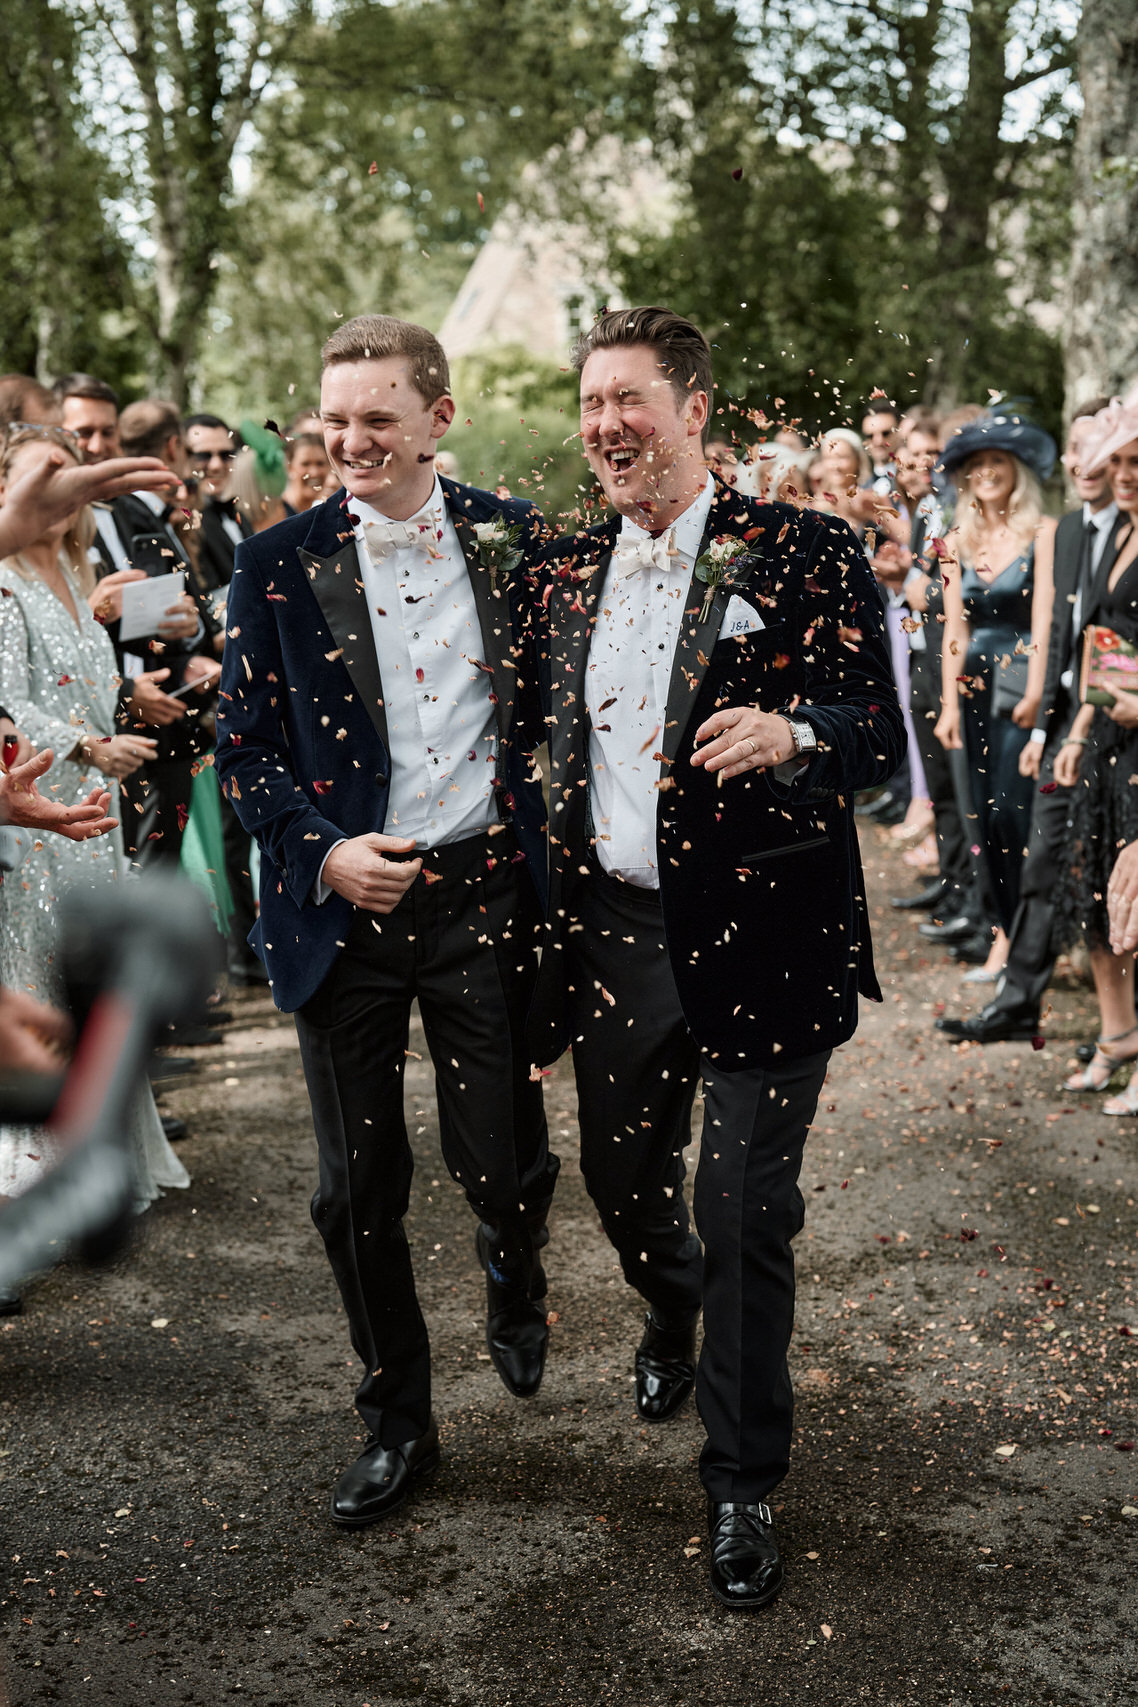 Two guys in suits are tossing confetti at each other.